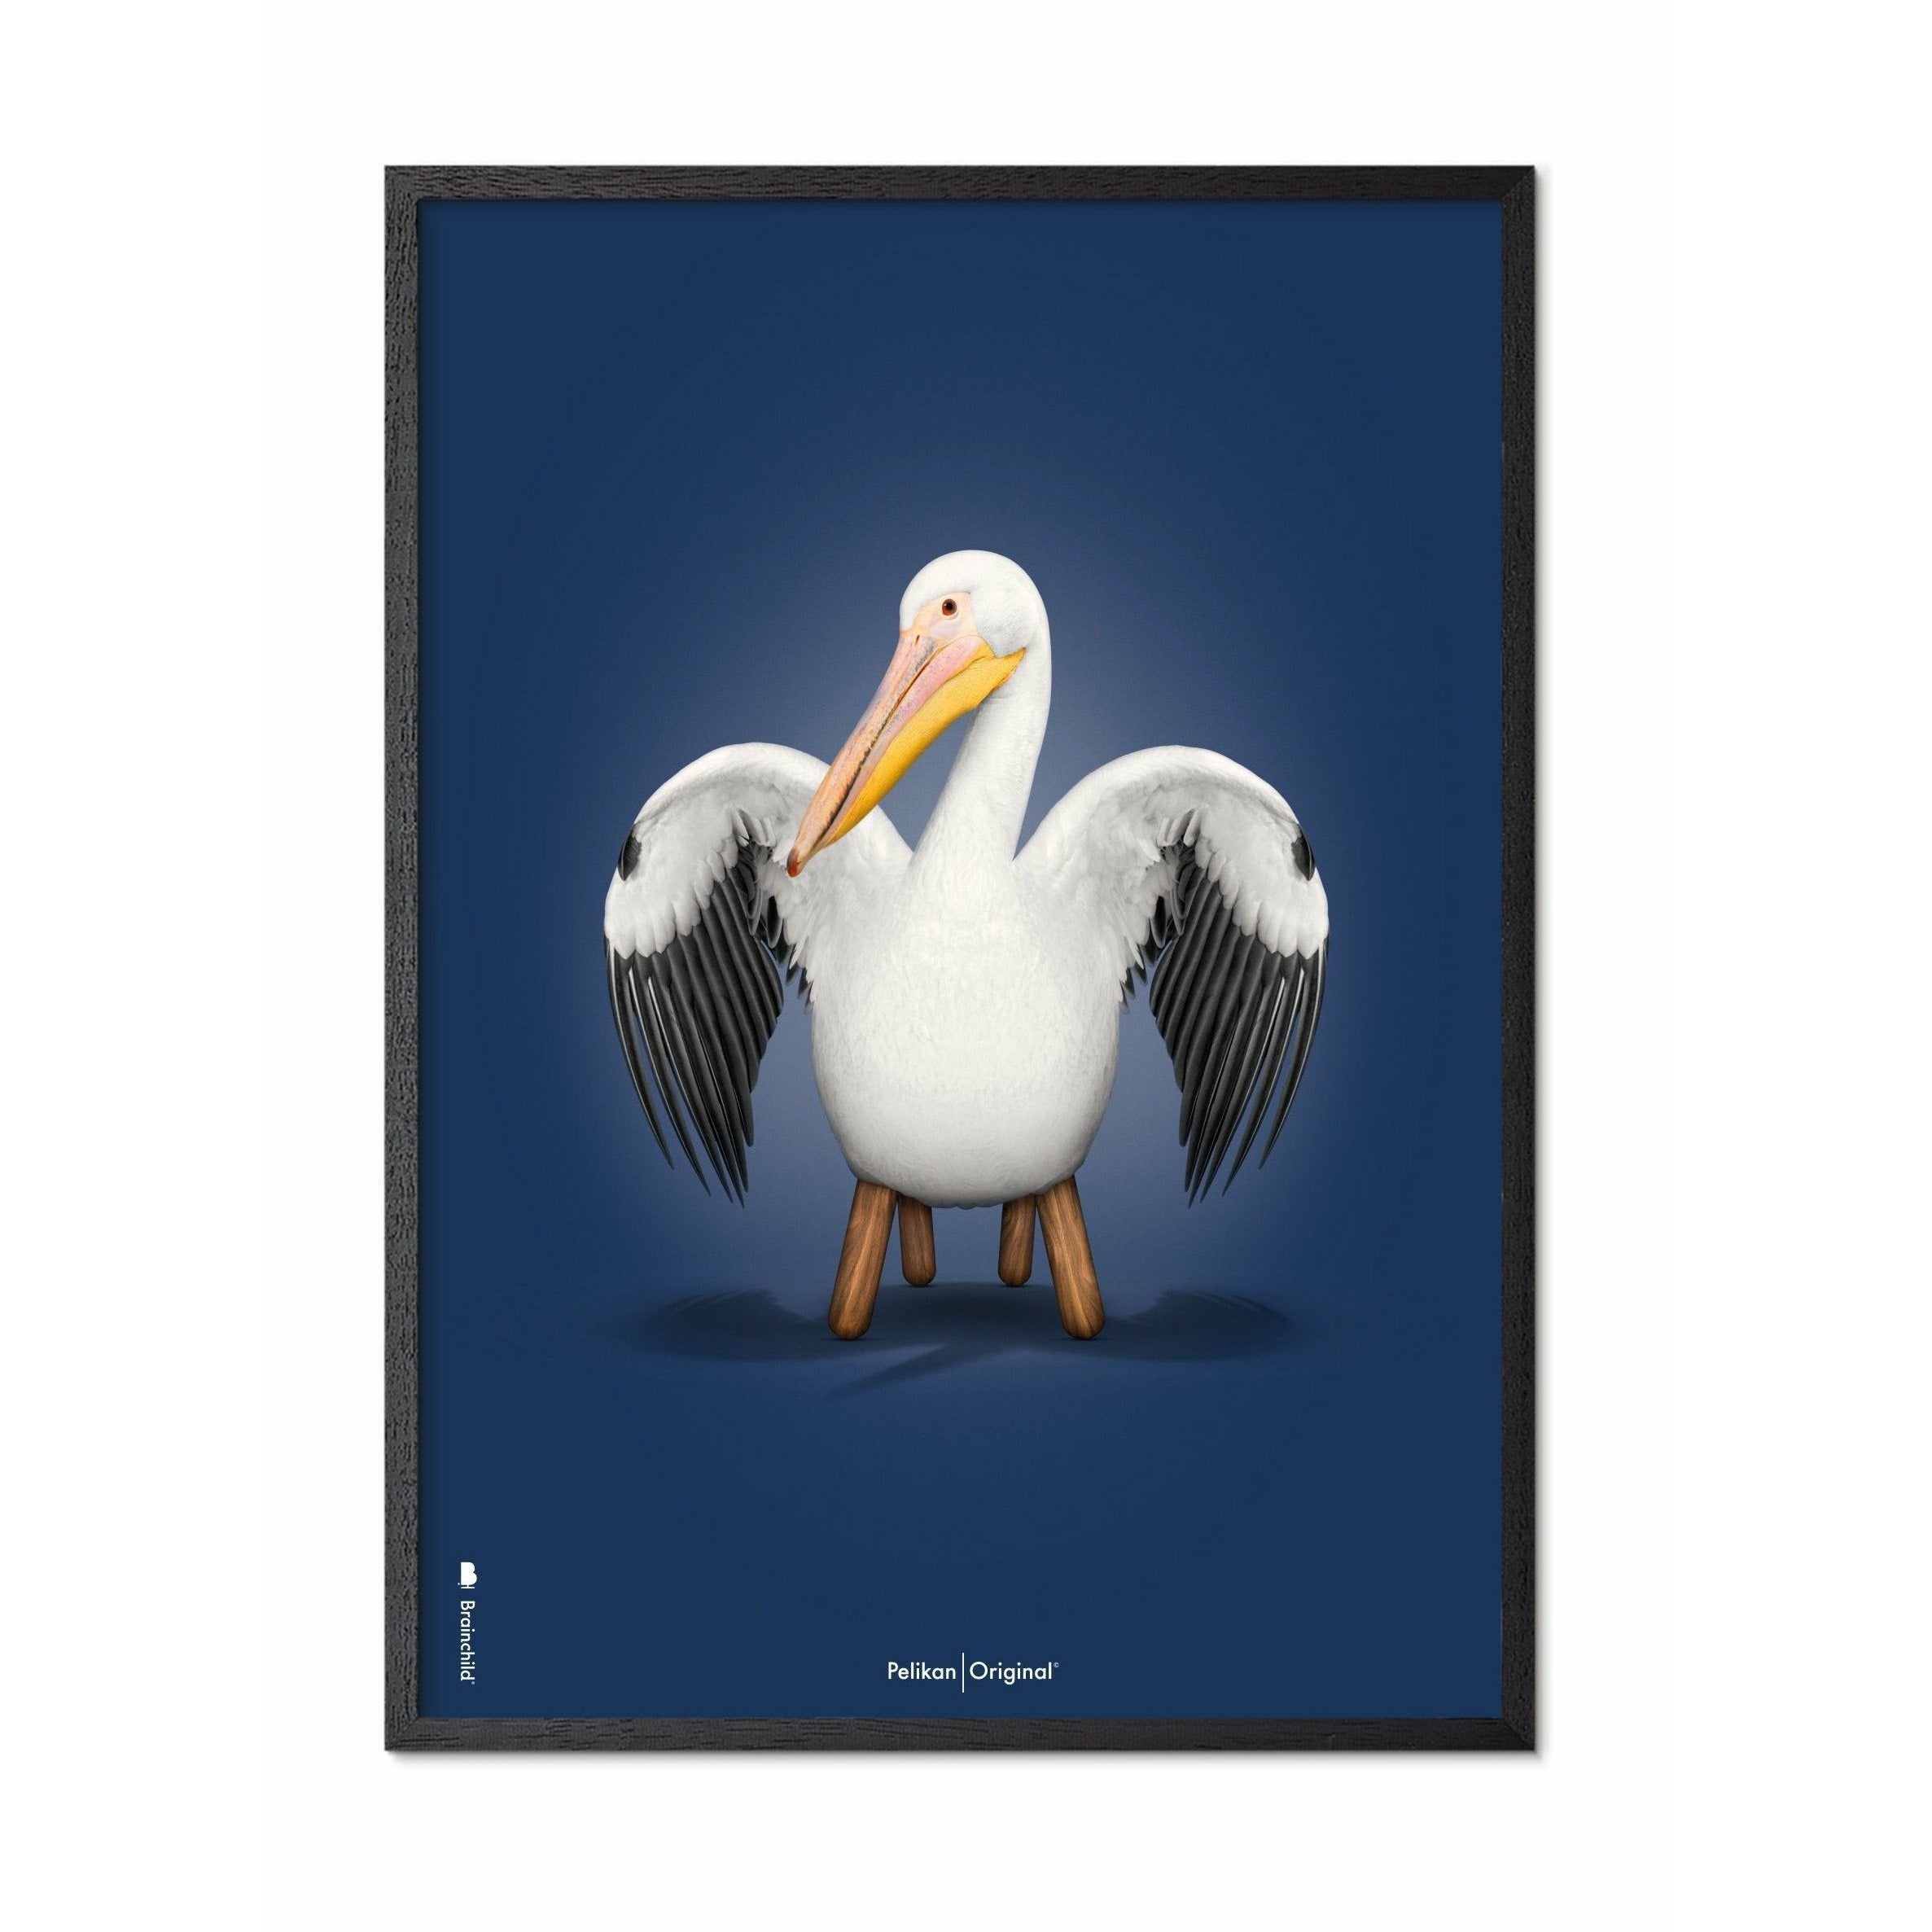 Brainchild Pelikan Classic Poster, Frame In Black Lacquered Wood A5, Dark Blue Background